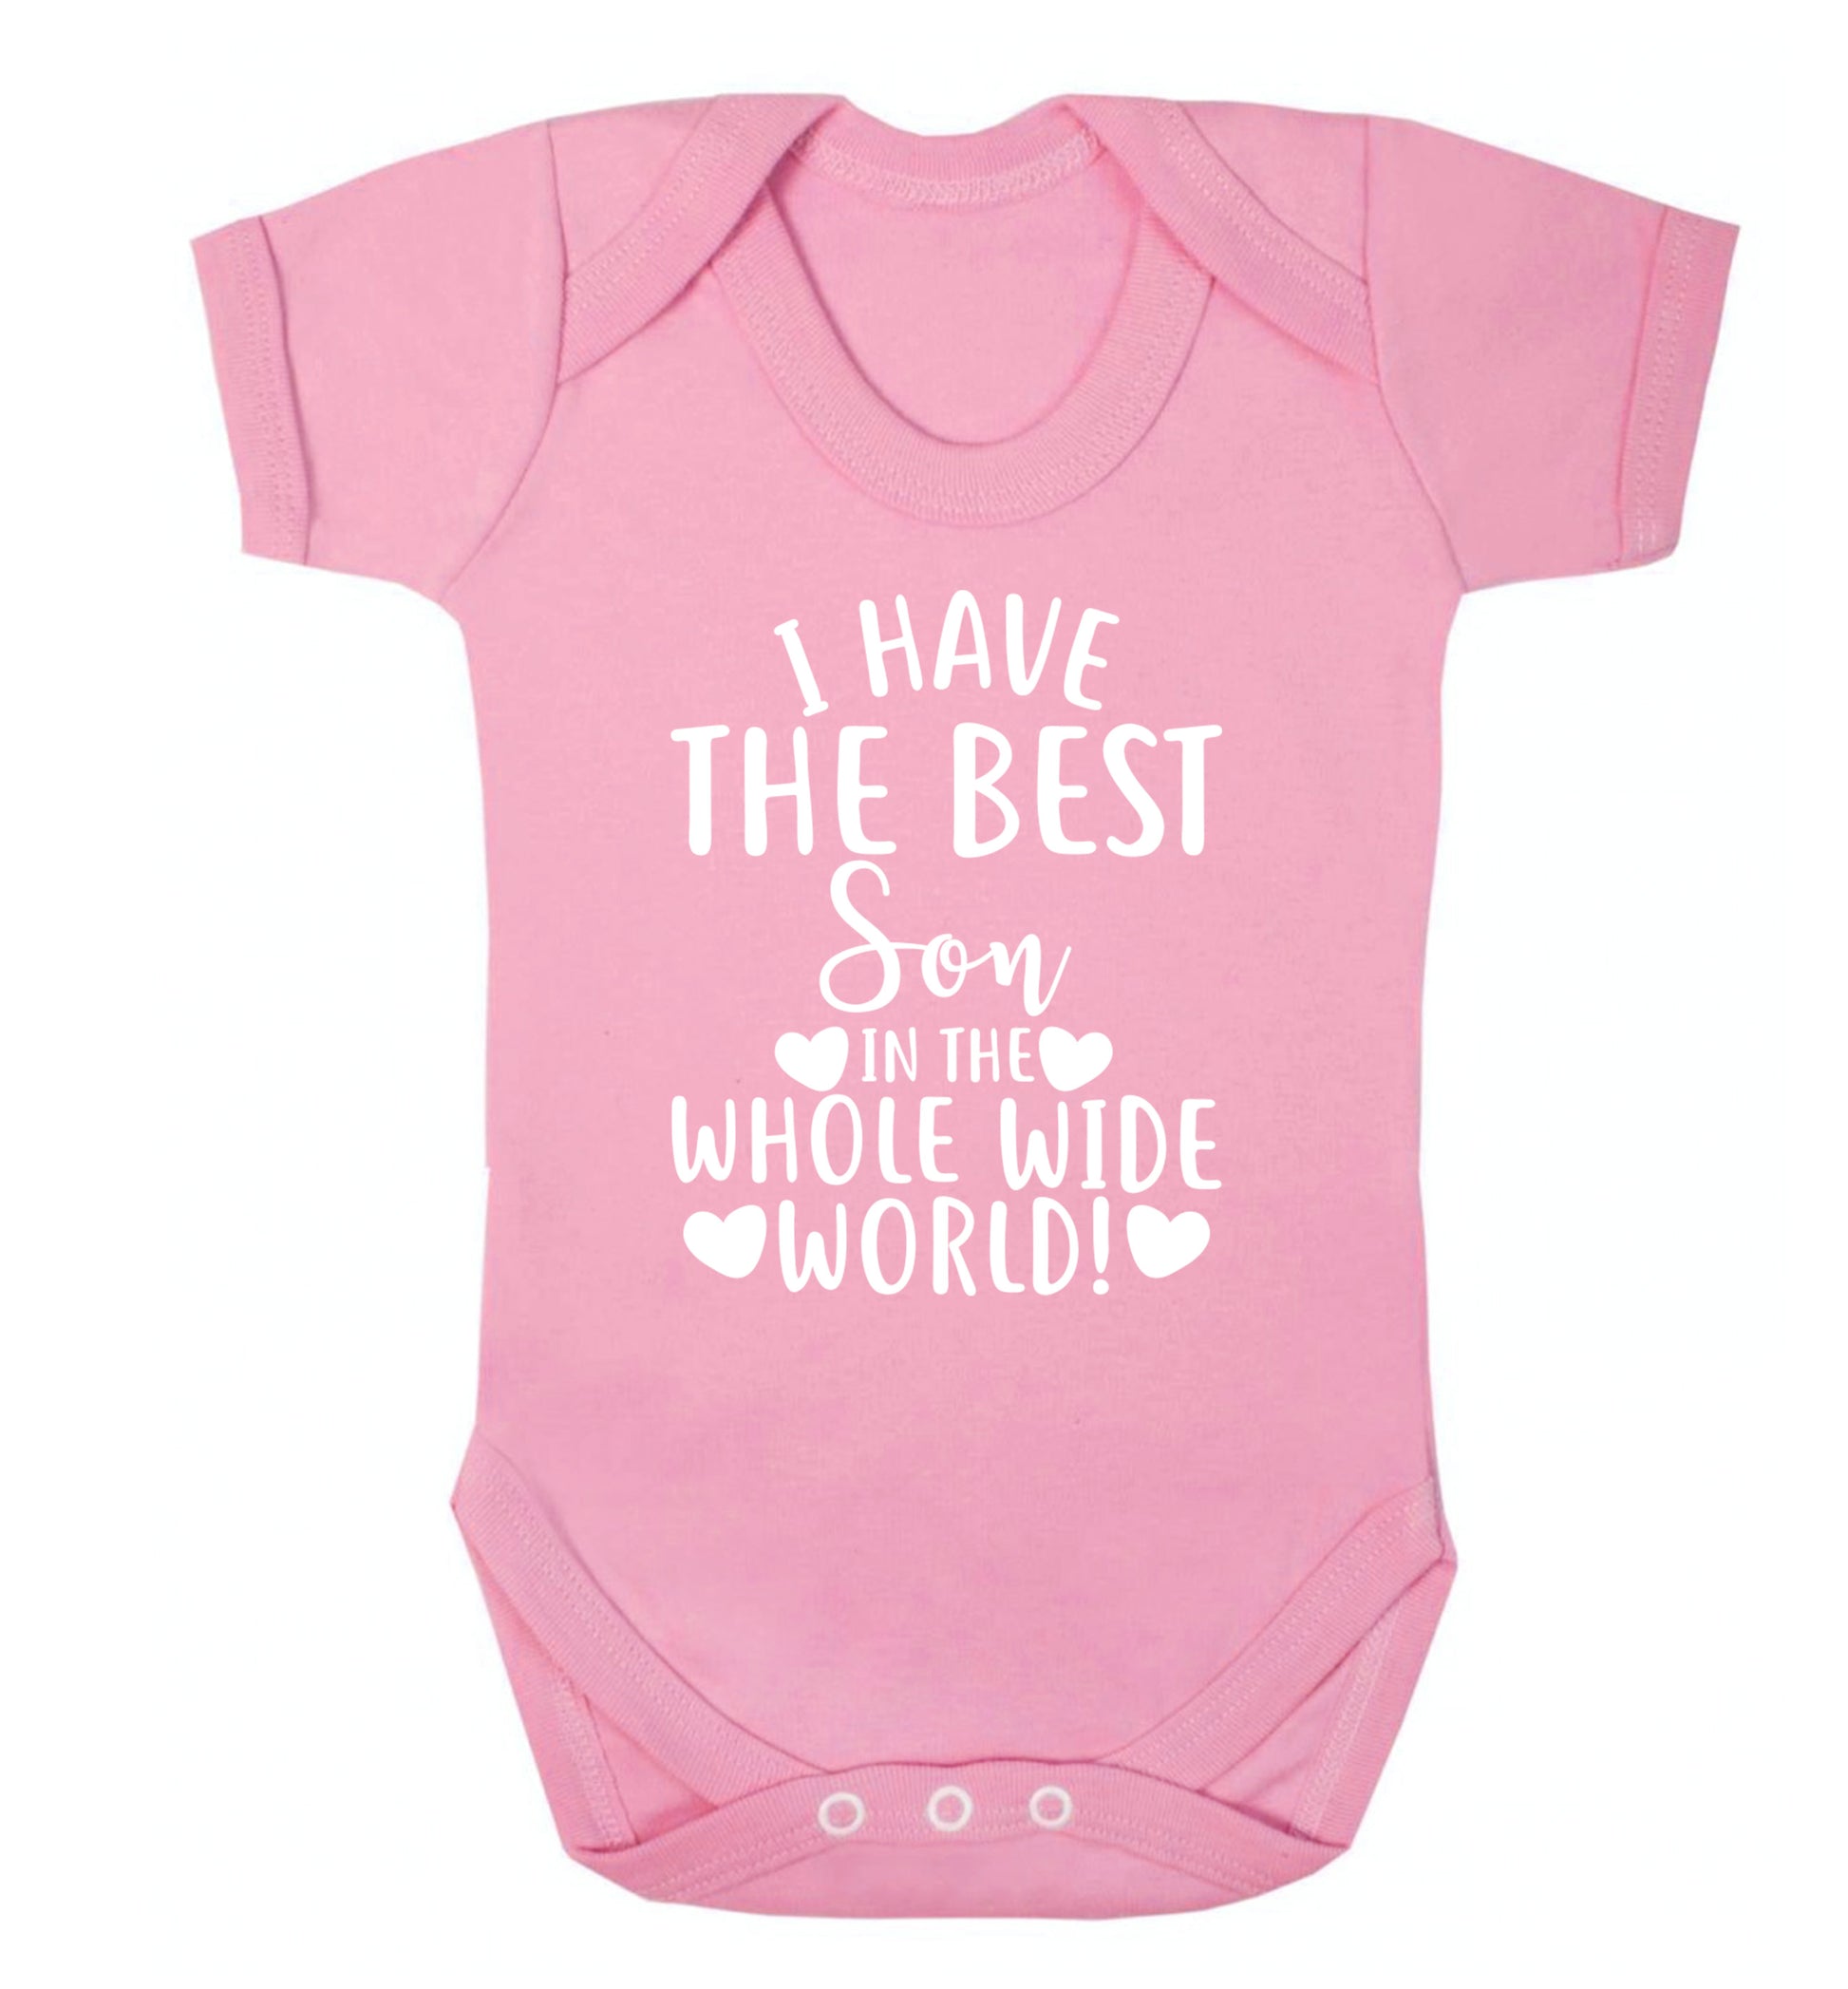 I have the best son in the whole wide world! Baby Vest pale pink 18-24 months